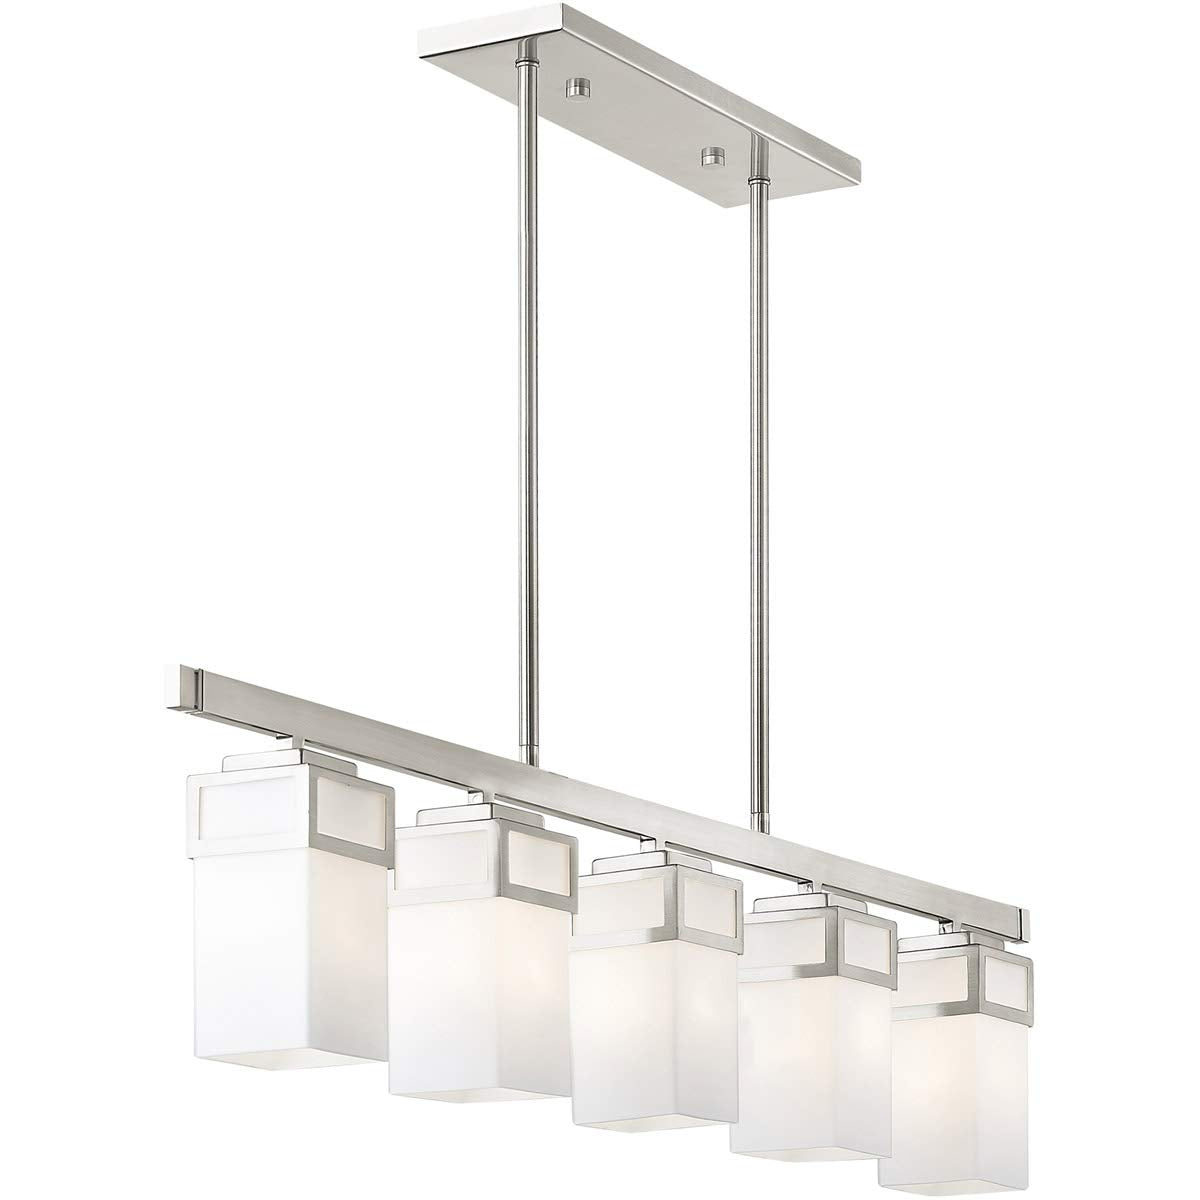 Livex Lighting 40194-91 Transitional Five Light Linear Chandelier from Harding Collection in Pwt, Nckl, B/S, Slvr. Finish, 42.00 inches, 9.50x42.00x4.50, Brushed Nickel